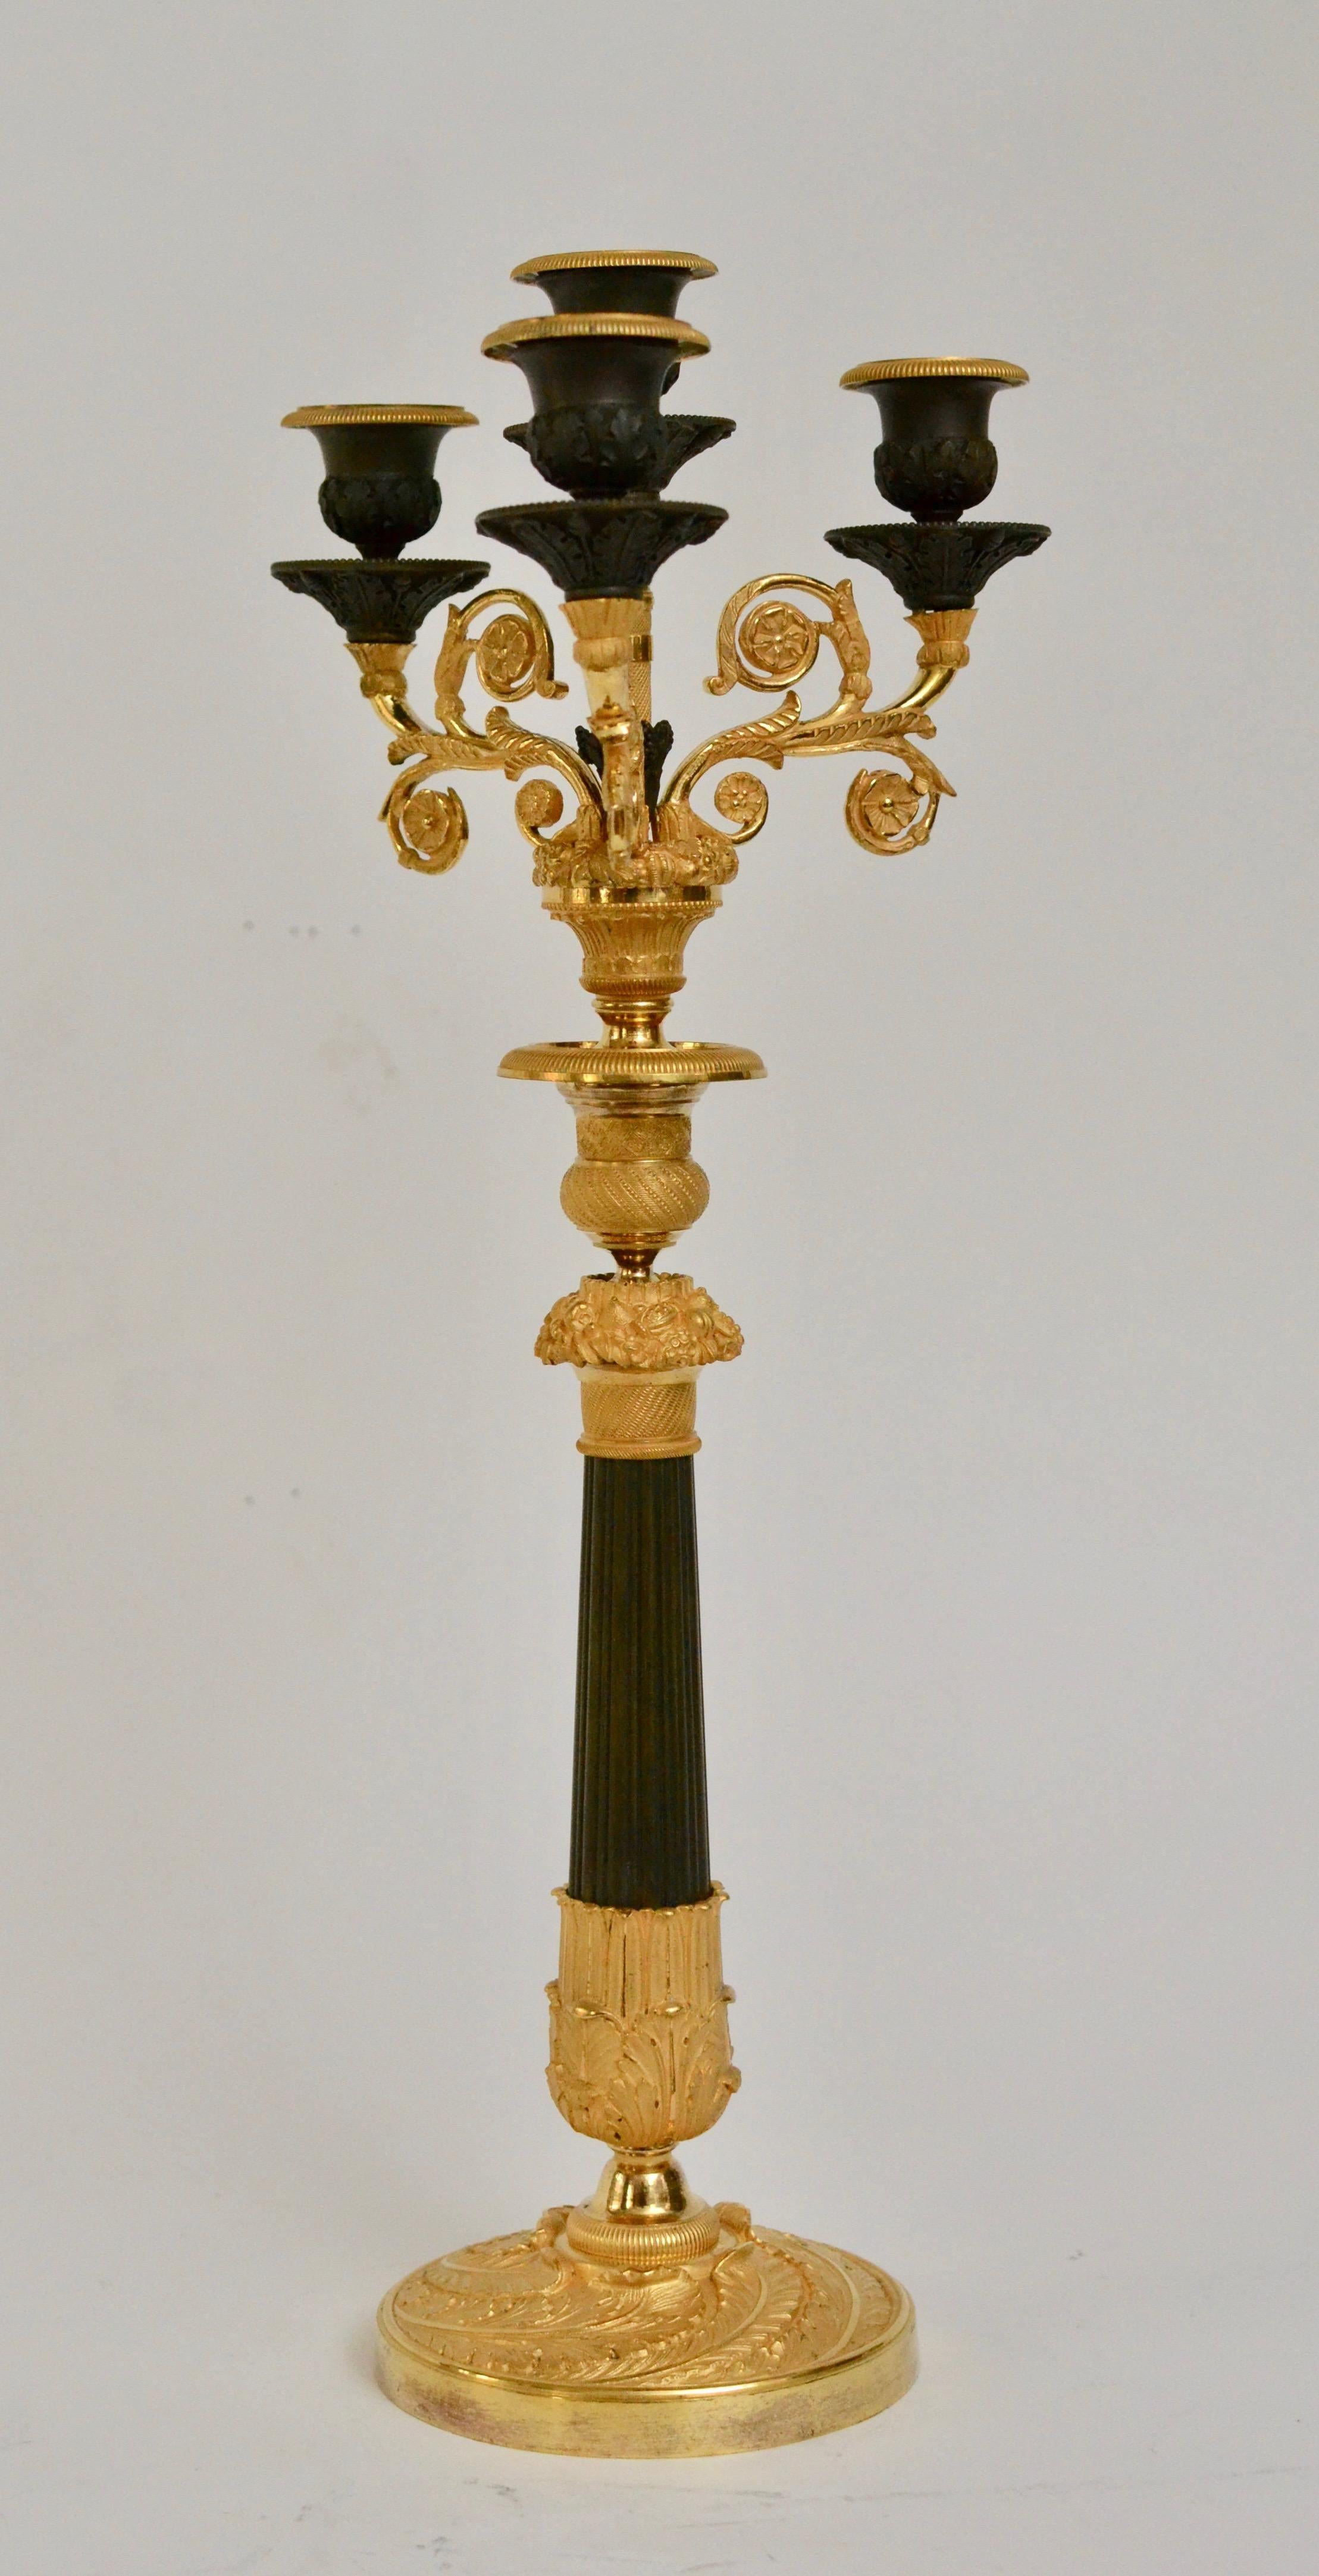 A pair of French Empire gilt and patinated bronze candelabra, circa 1825. Detachable top.